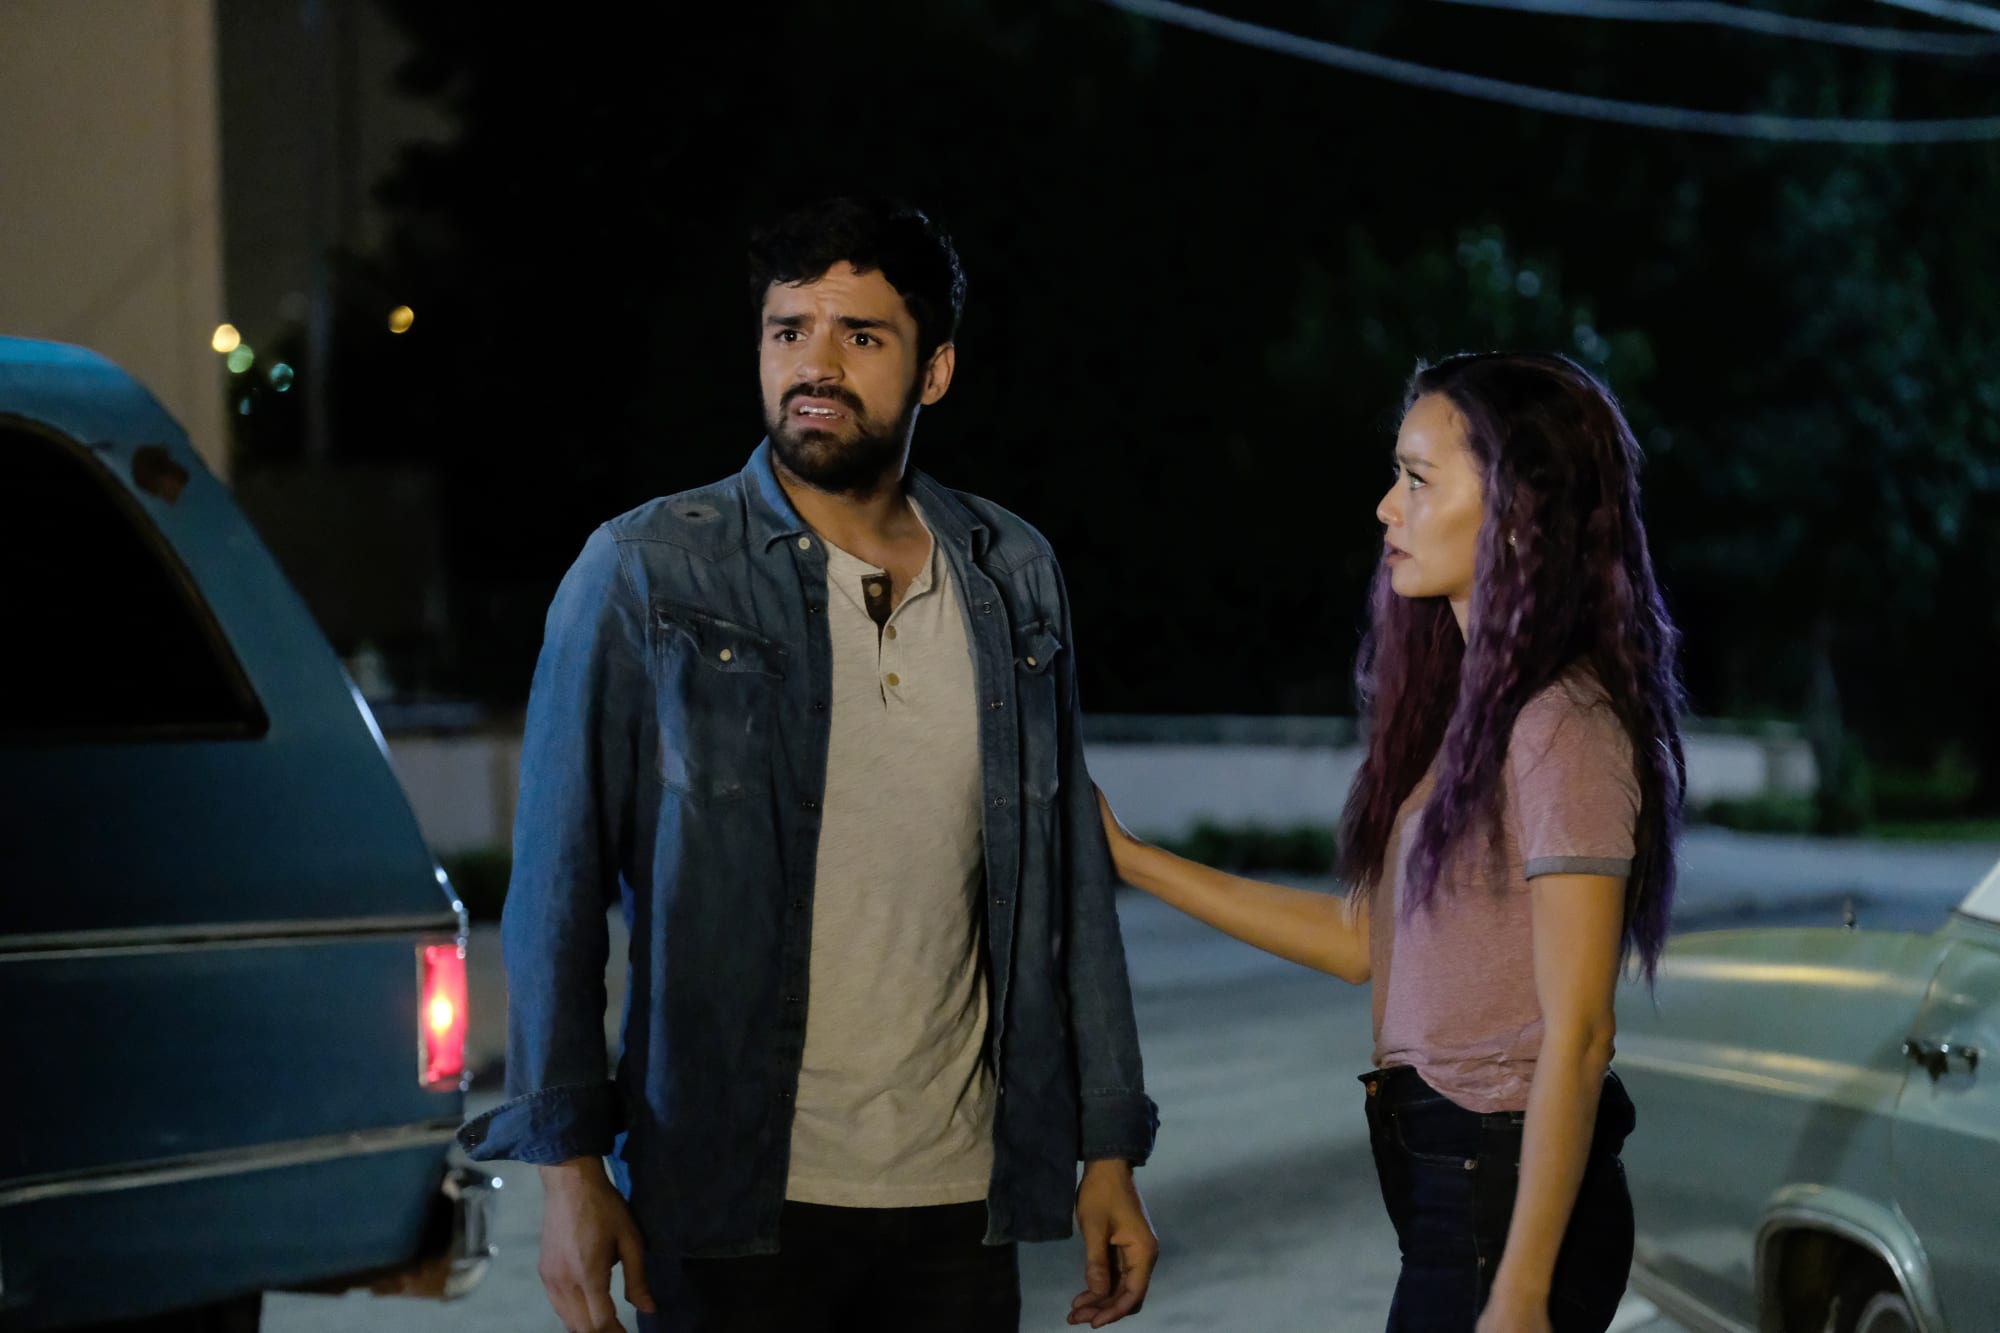 How to watch The Gifted Season 2, Episode 1 free online